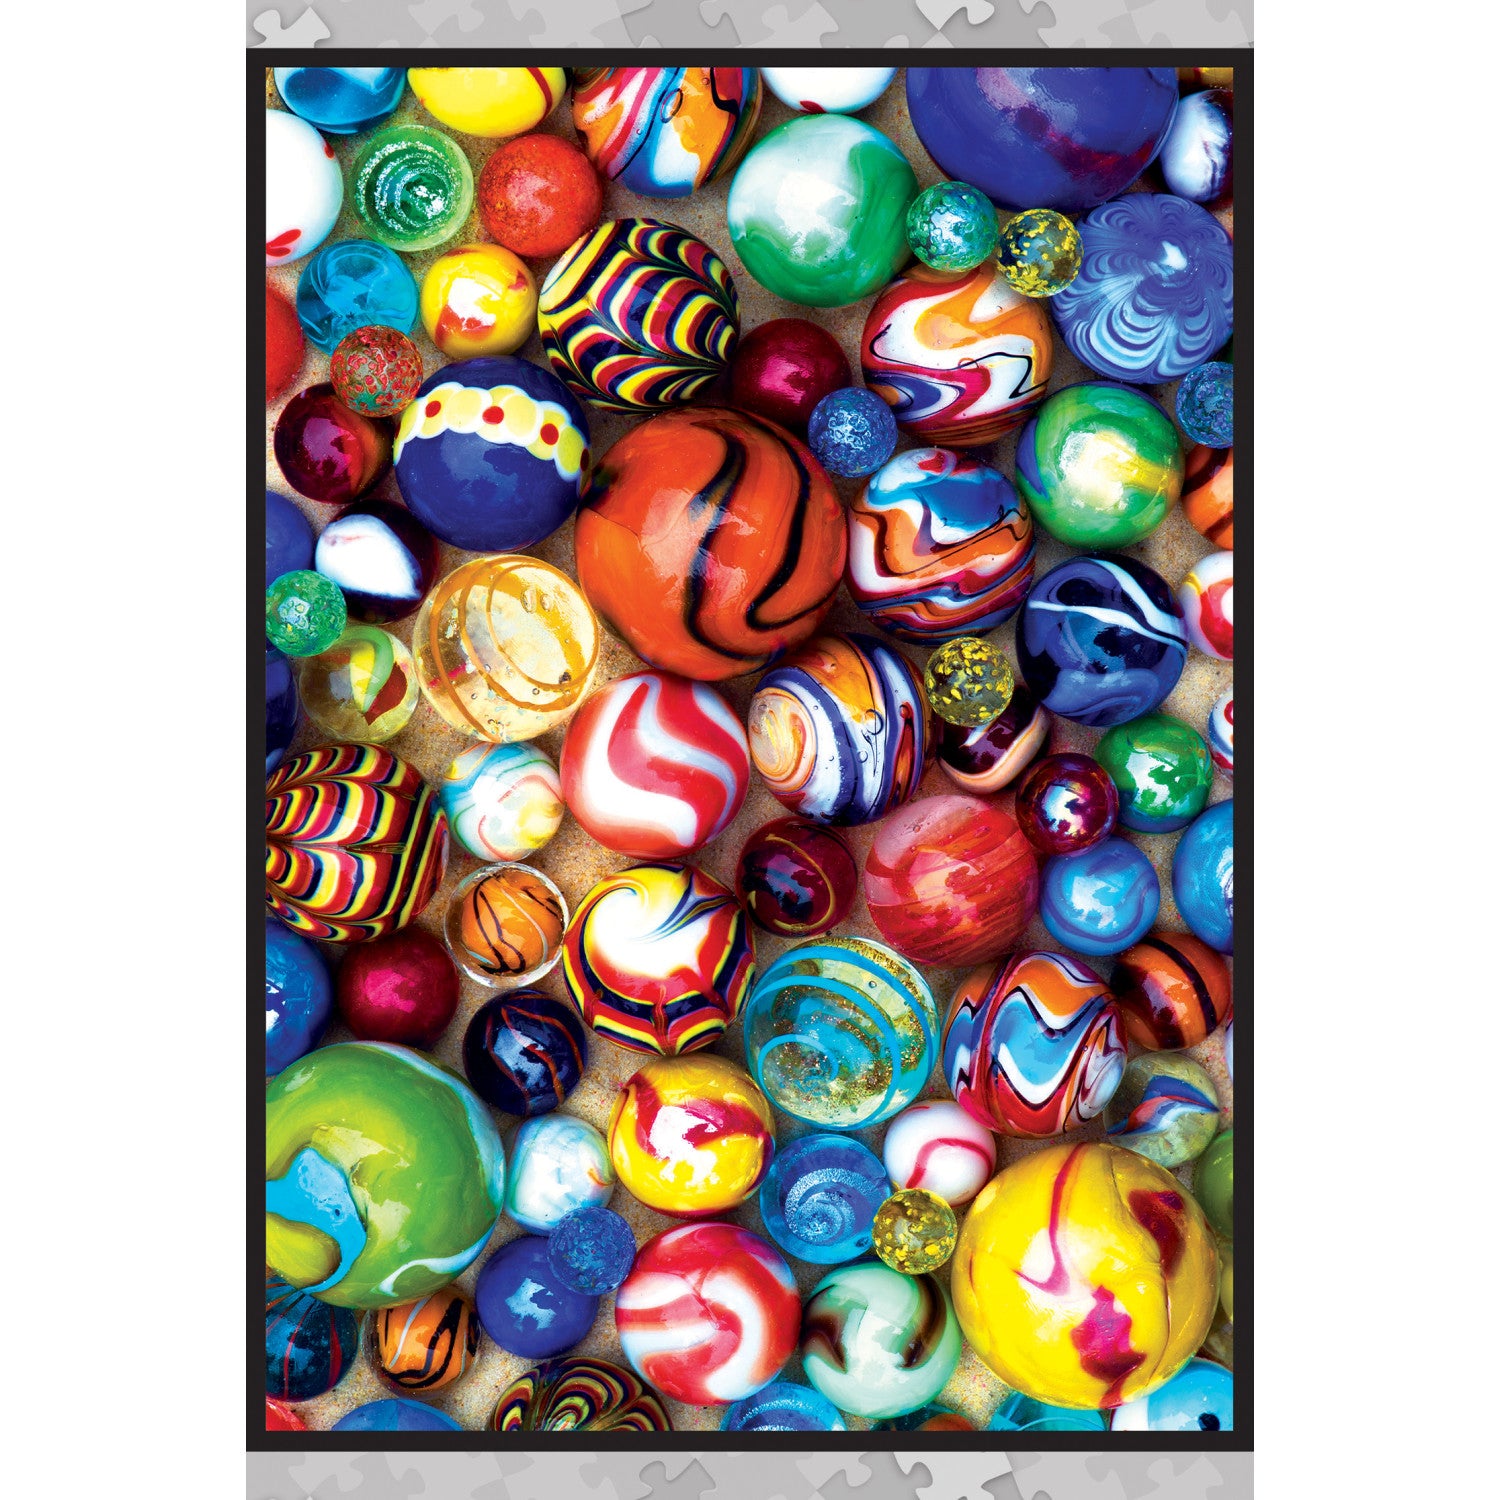 Worlds Smallest - All My Marbles 1000 Piece Puzzle